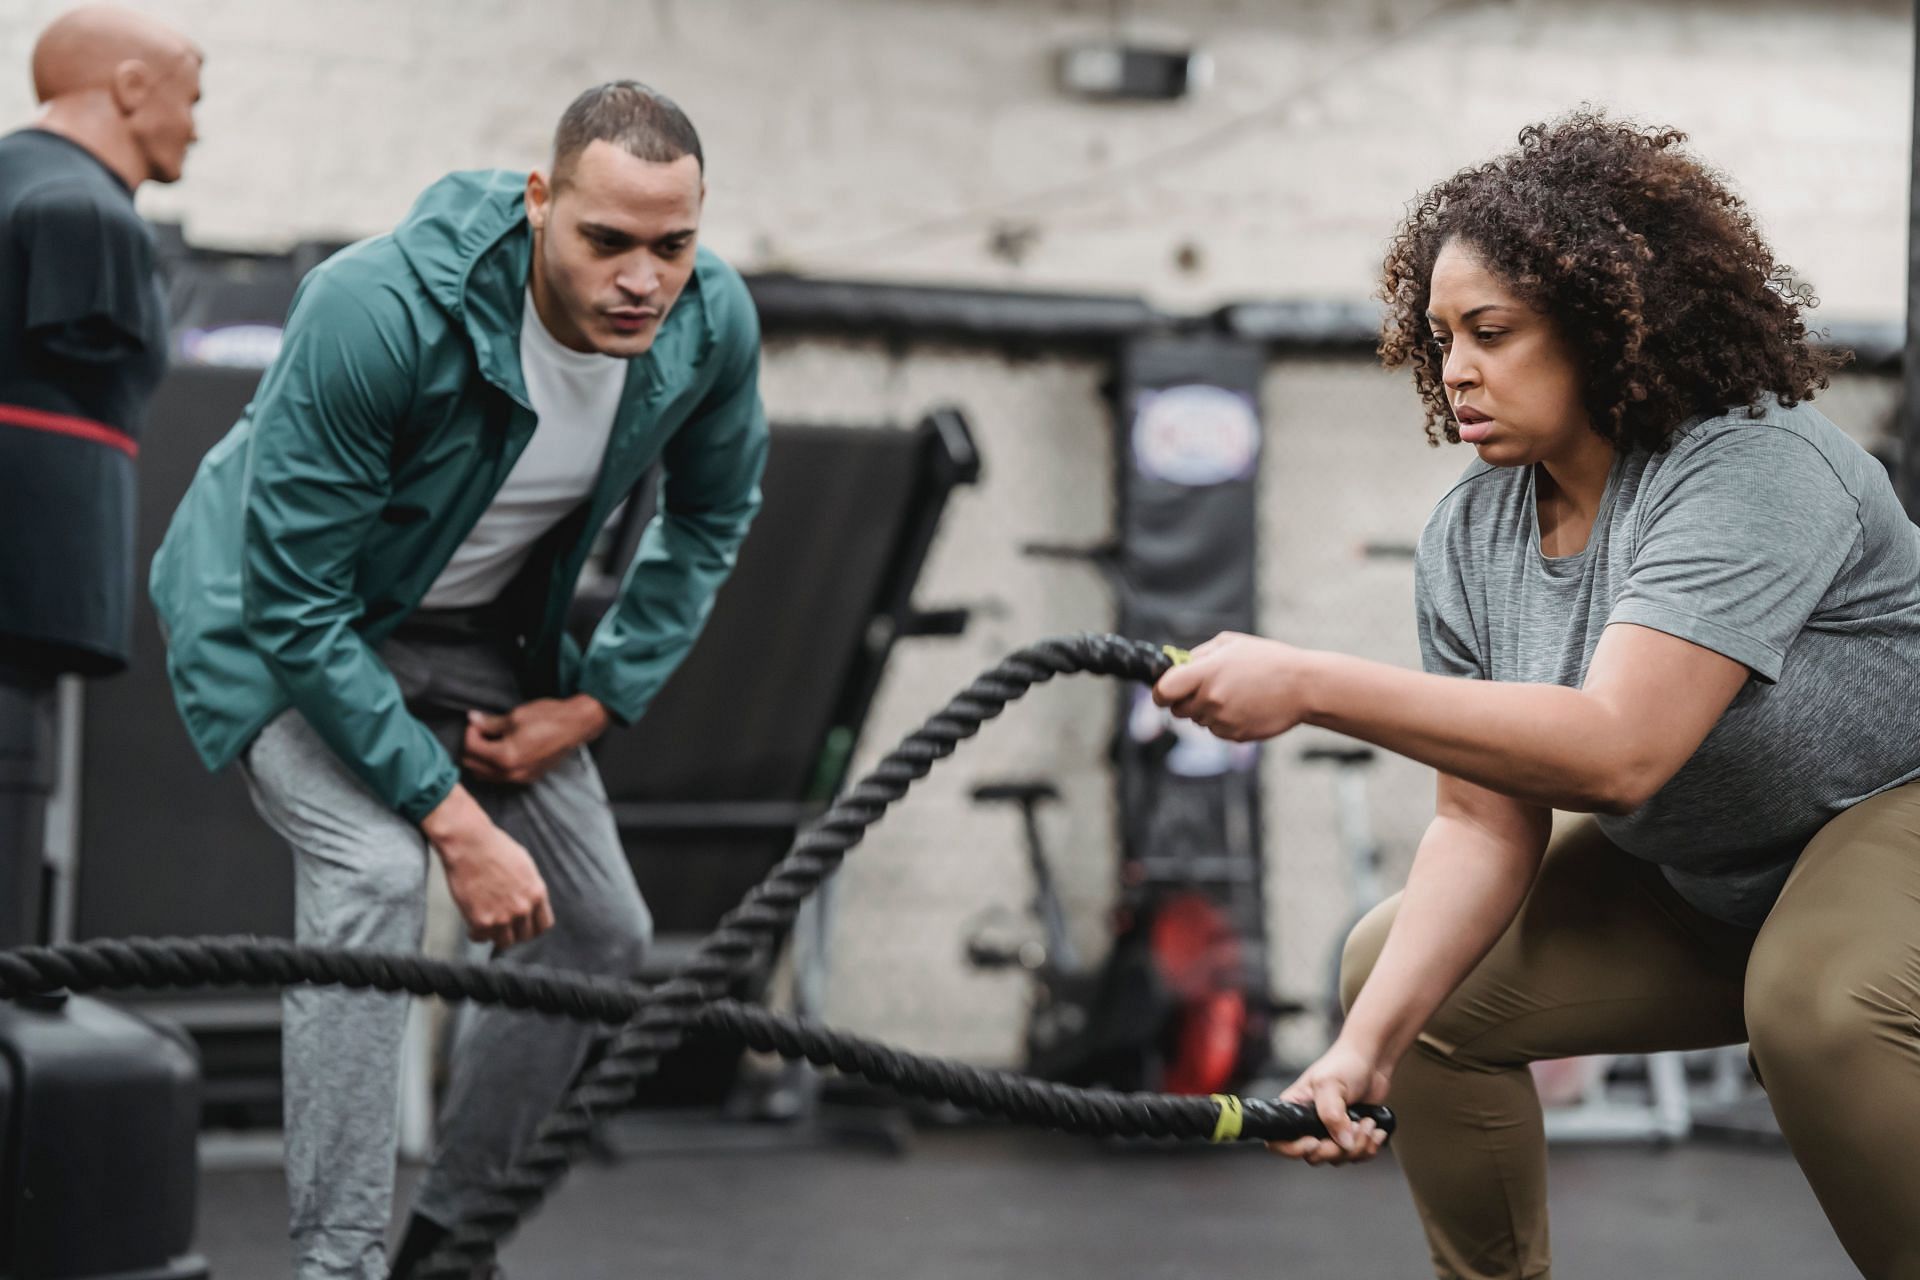 Functional exercises can help you build muscle tone, but most of them are not great for building muscle mass or burning fat. (Image via Pexels/Julia Larson)